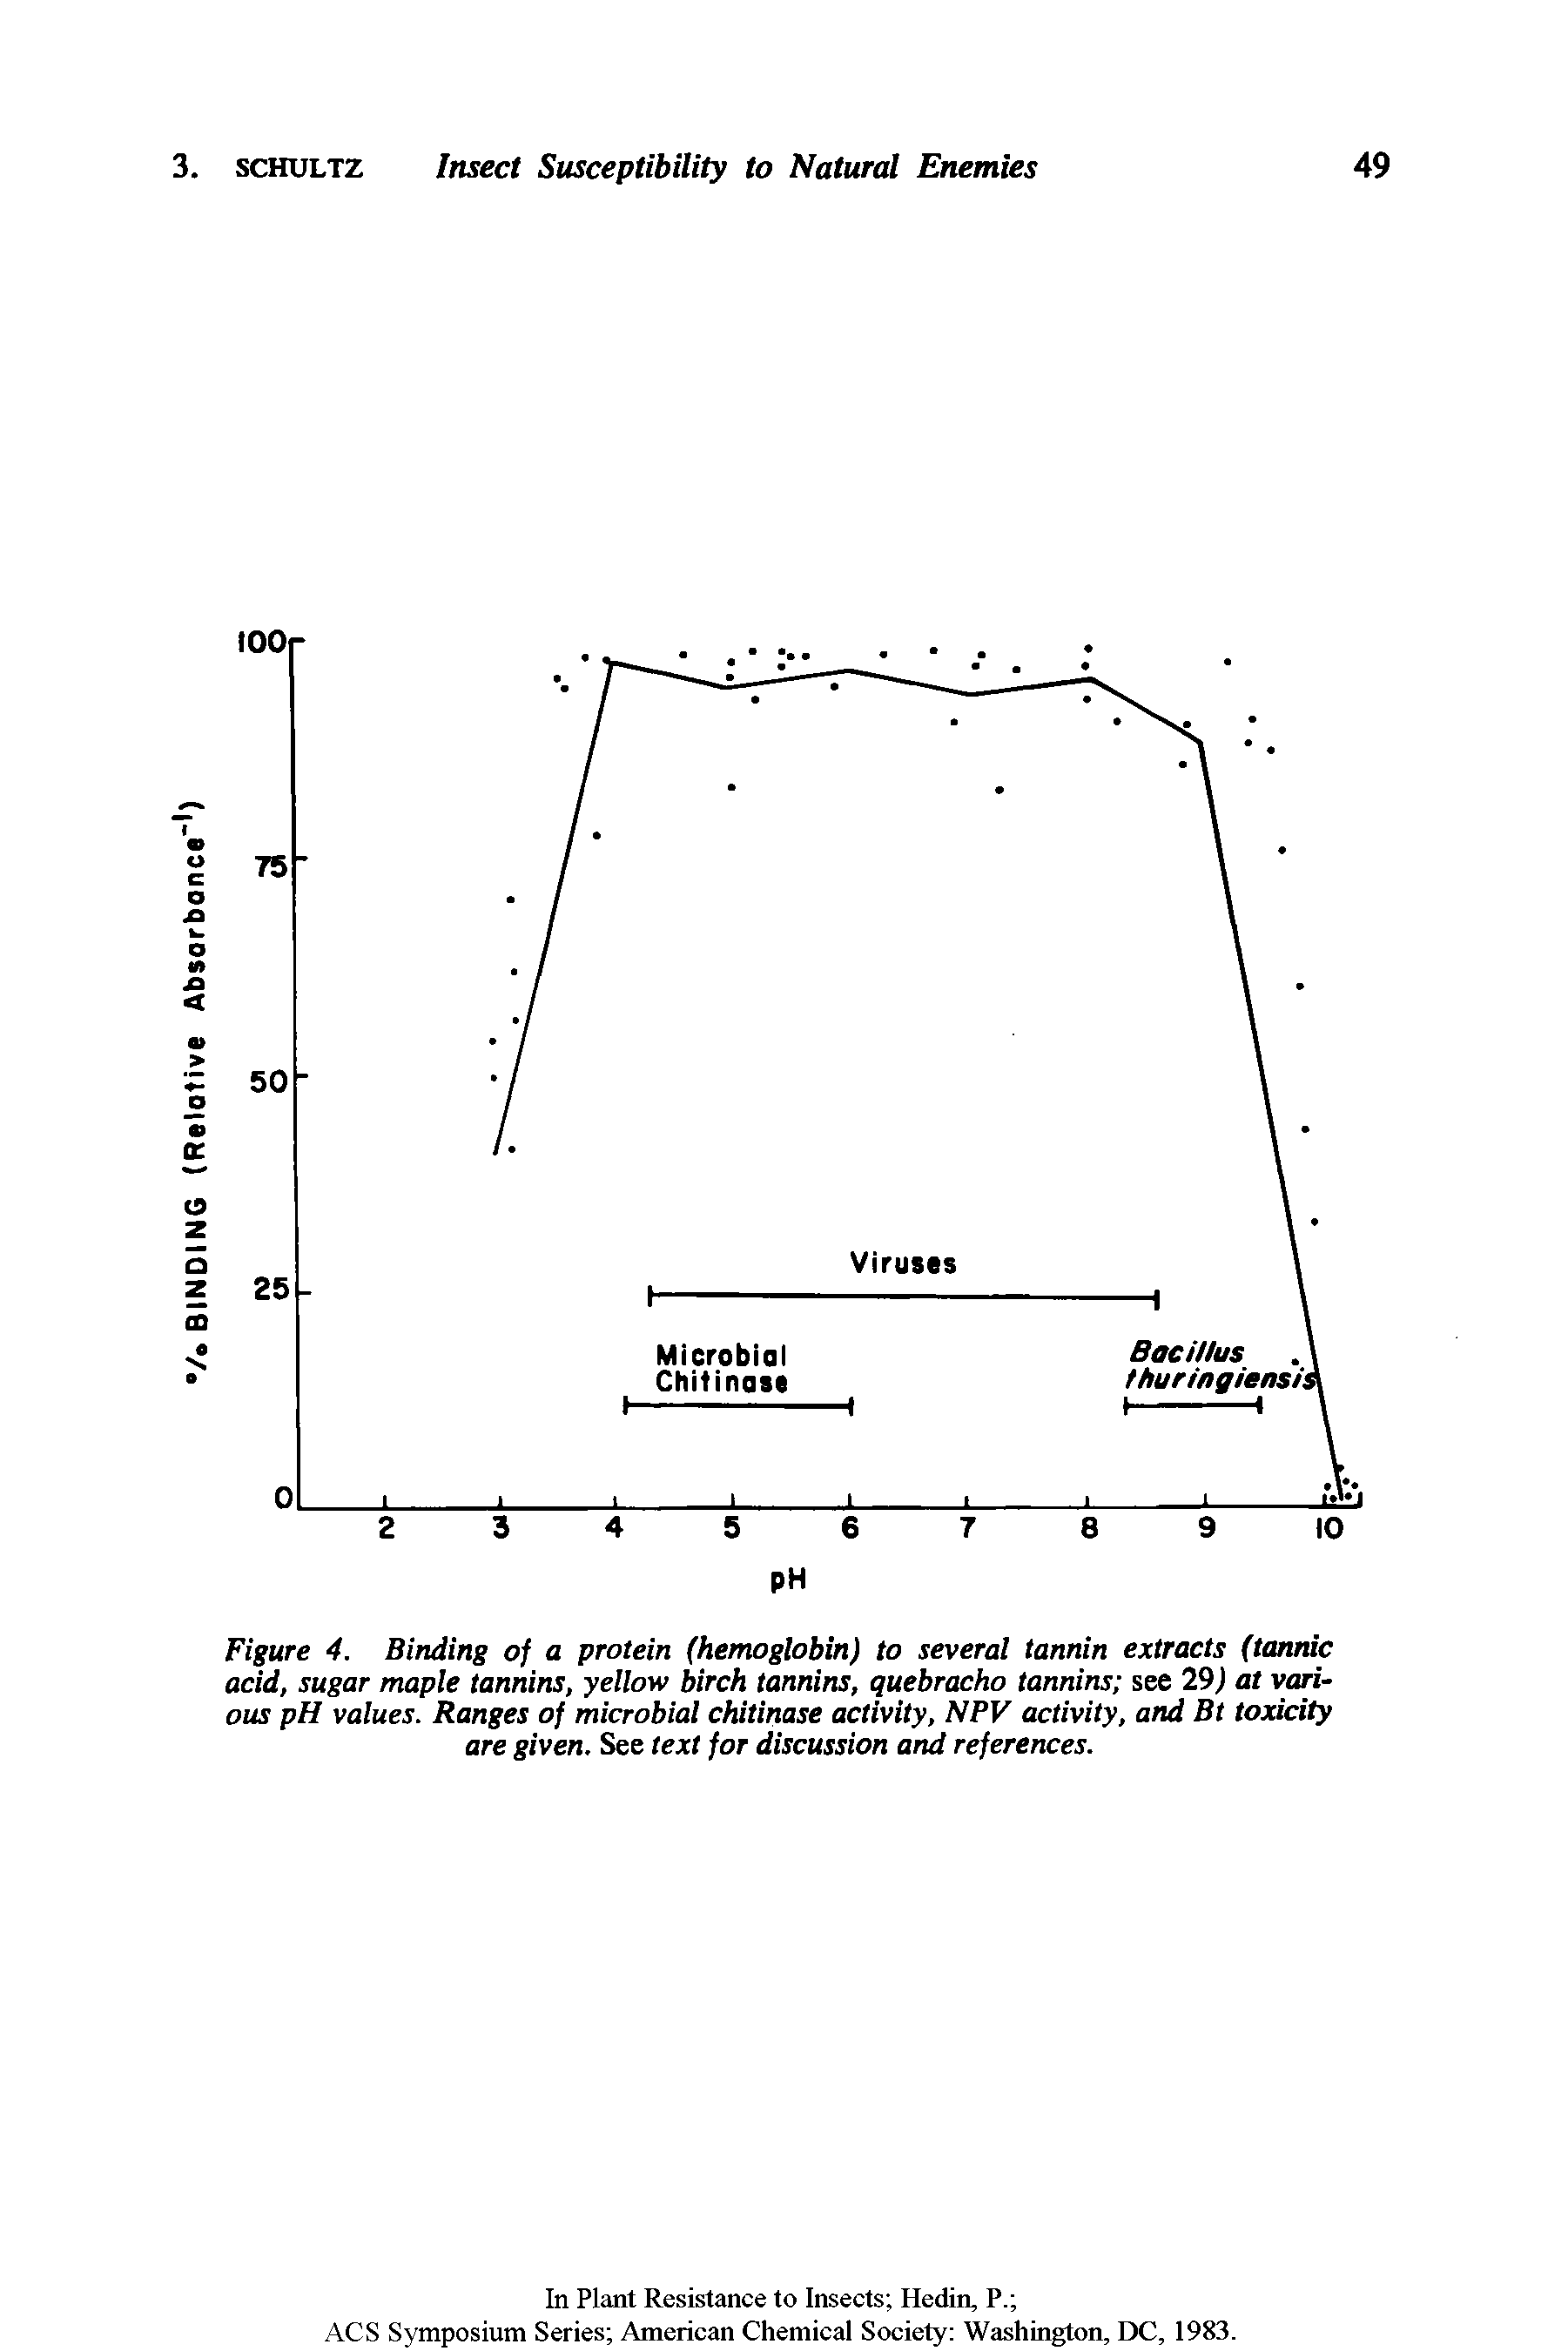 Figure 4. Binding of a protein (hemoglobin) to several tannin extracts (tannic acid, sugar maple tannins, yellow birch tannins, quebracho tannins see 29) at various pH values. Ranges of microbial chitinase activity, NPV activity, and Bt toxicity are given. See text for discussion and references.